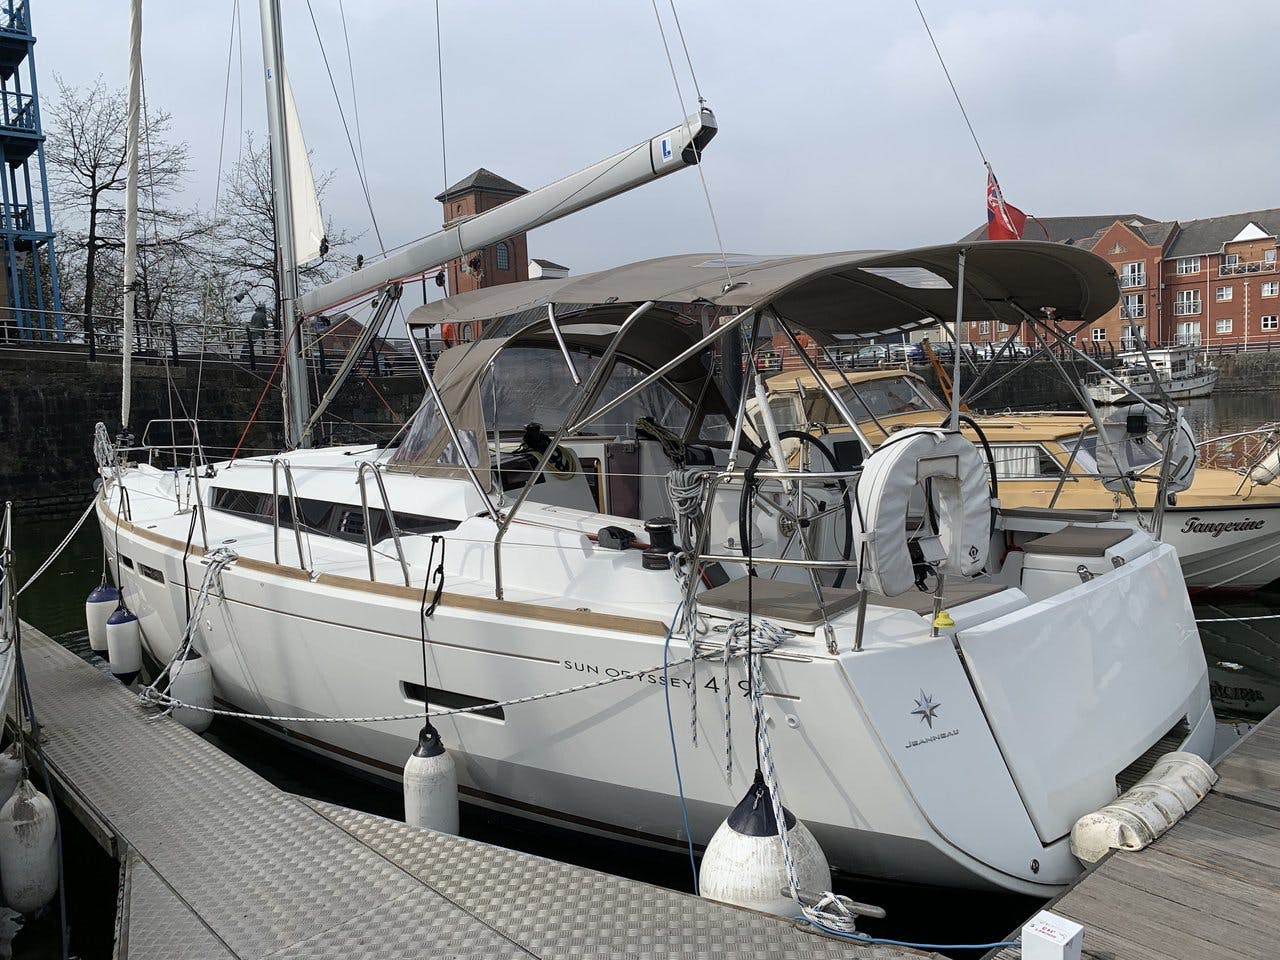 Book Sun Odyssey 419 Sailing yacht for bareboat charter in Largs Yacht Haven, North Ayrshire, Scotland, UK  with TripYacht!, picture 1